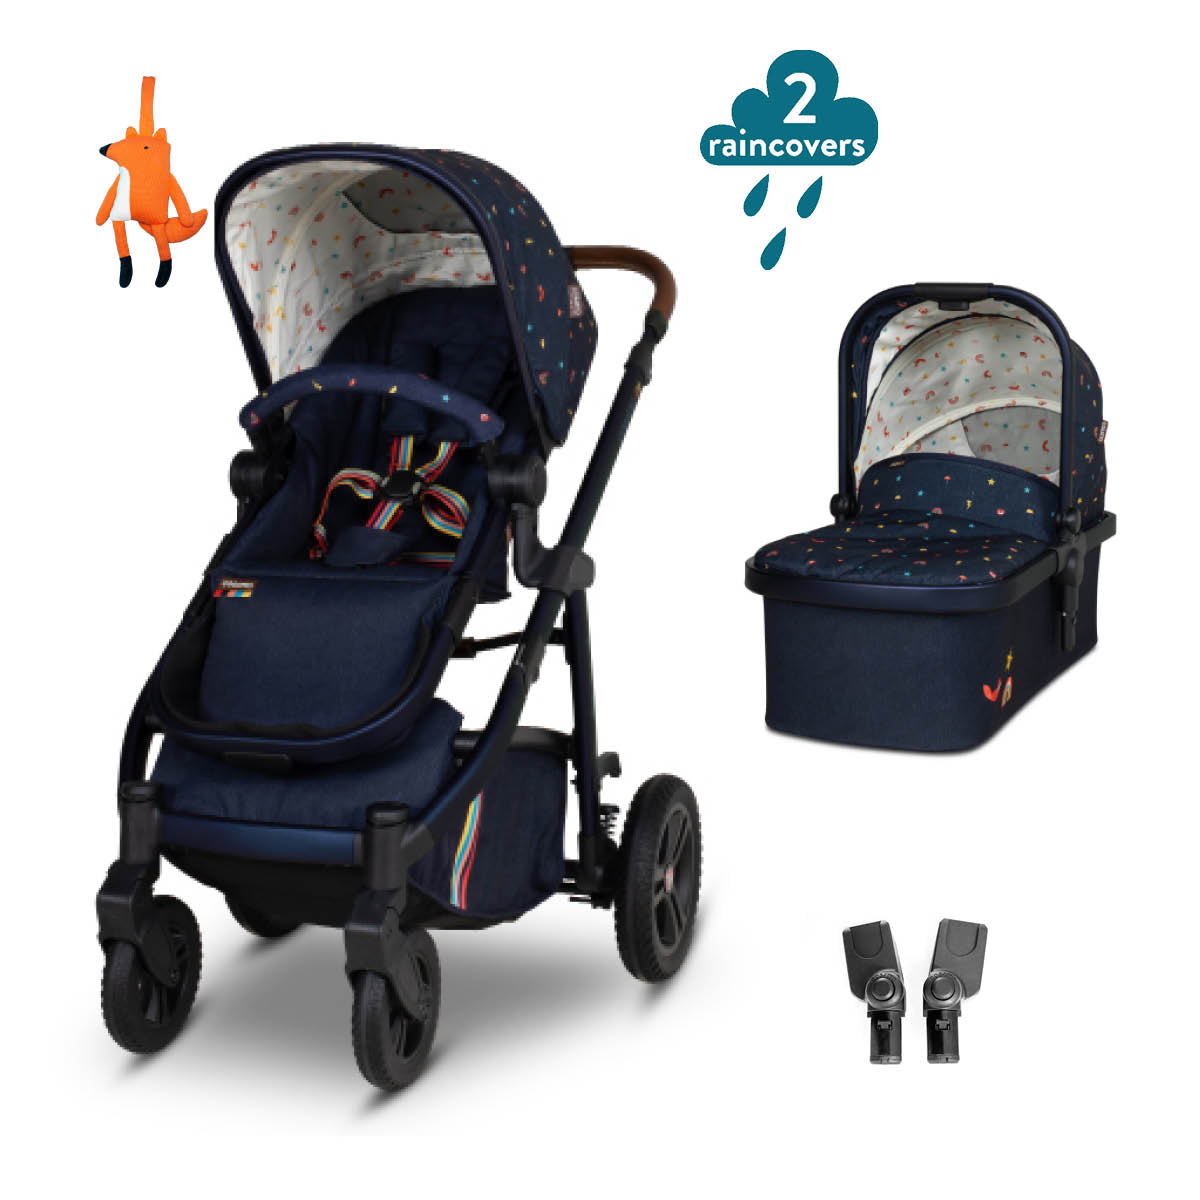 Pack Wow 3 con Carrito y Silla de Paseo - Doodle Days